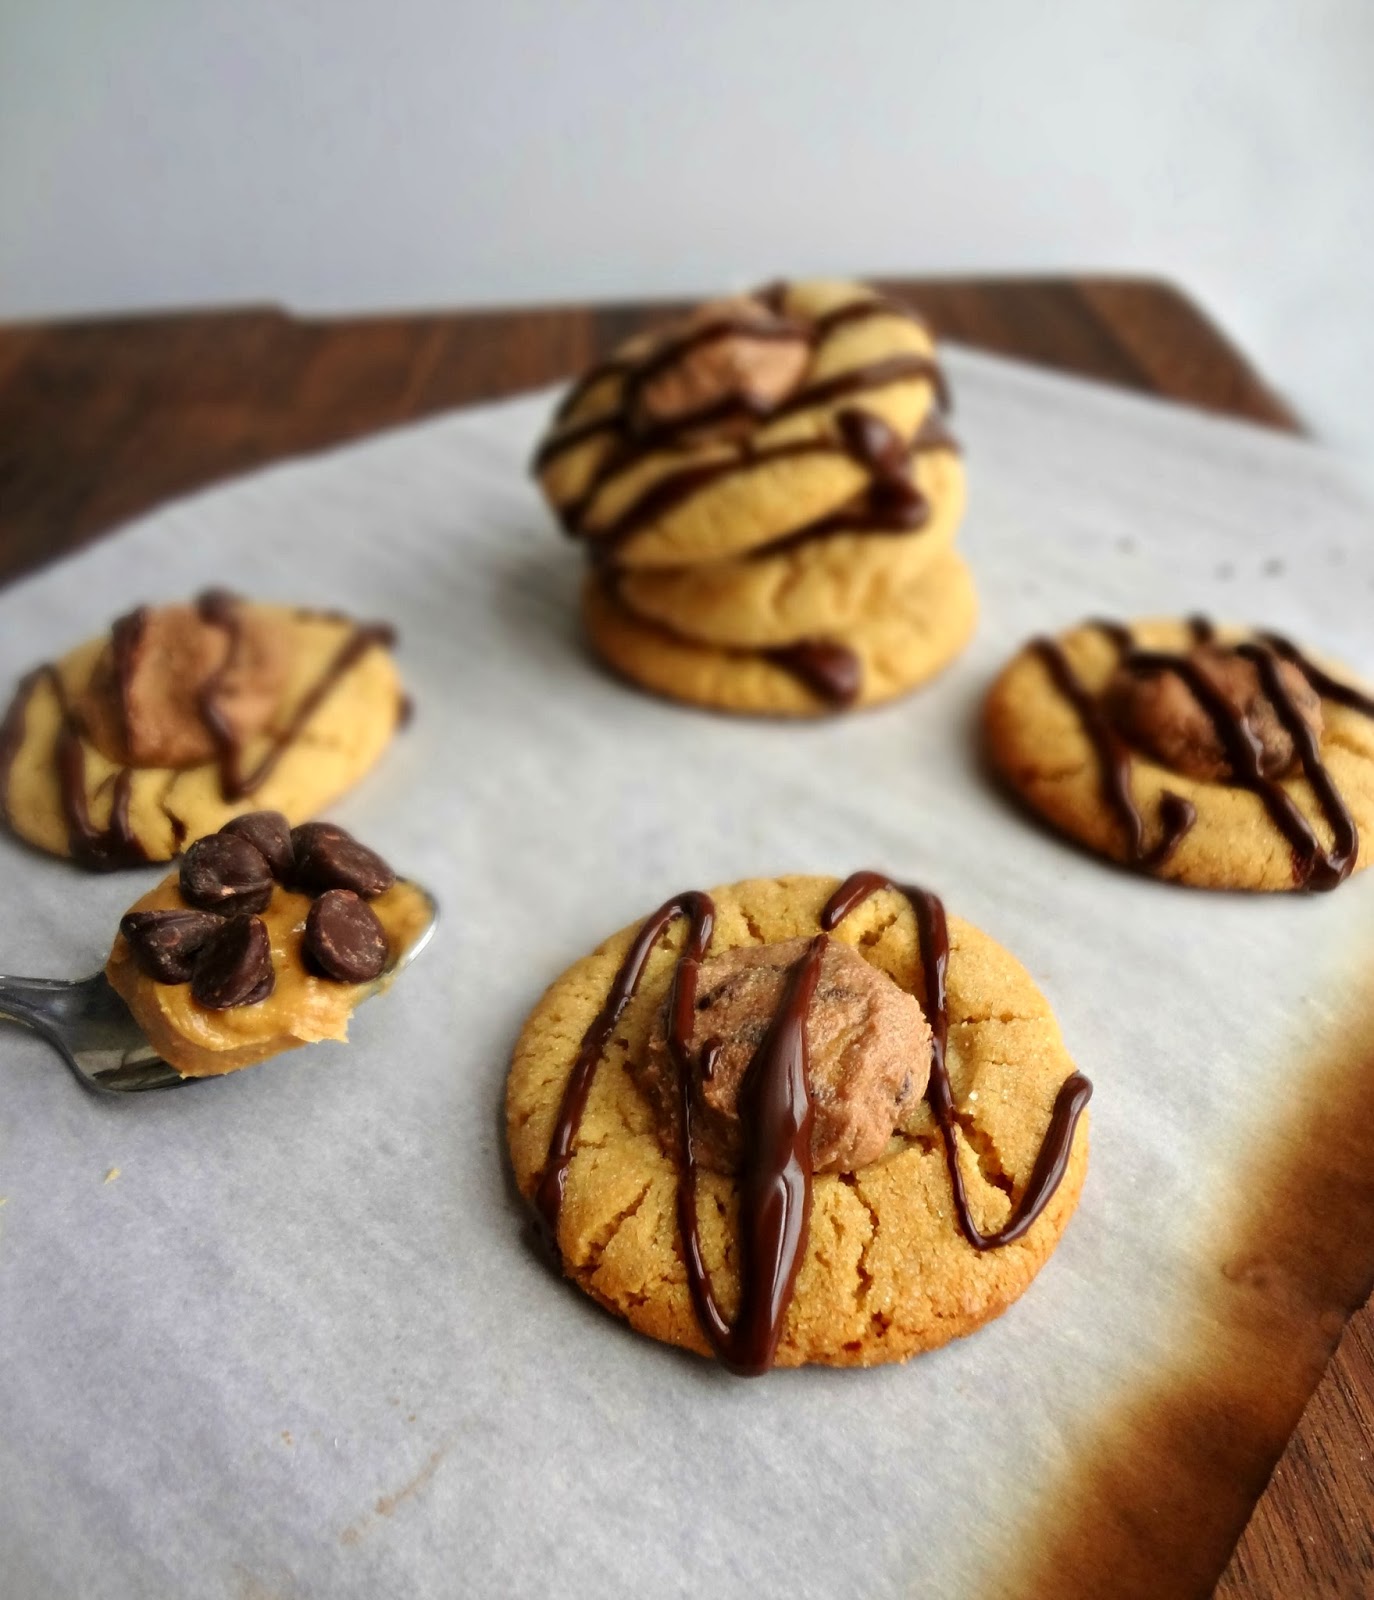 Peanut Butter & Chocolate Thumbprint Cookies for #chocPBday